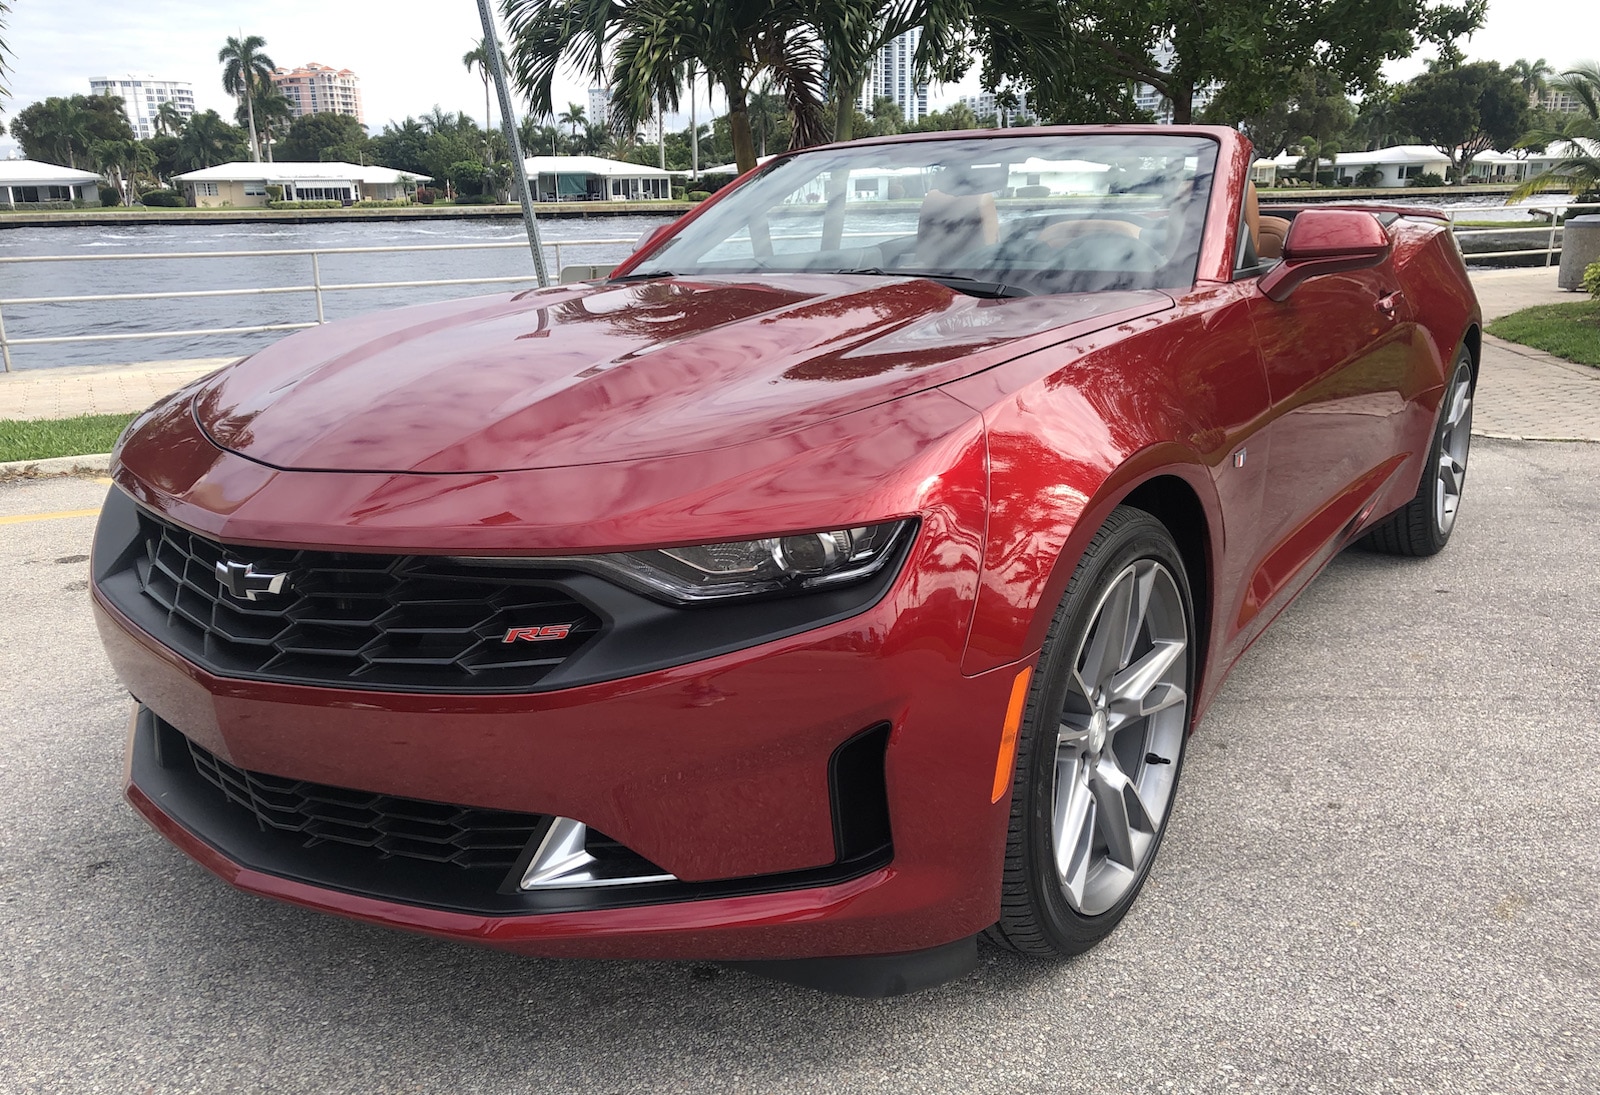 A Week With: 2021 Chevrolet Camaro RS Convertible - The ...